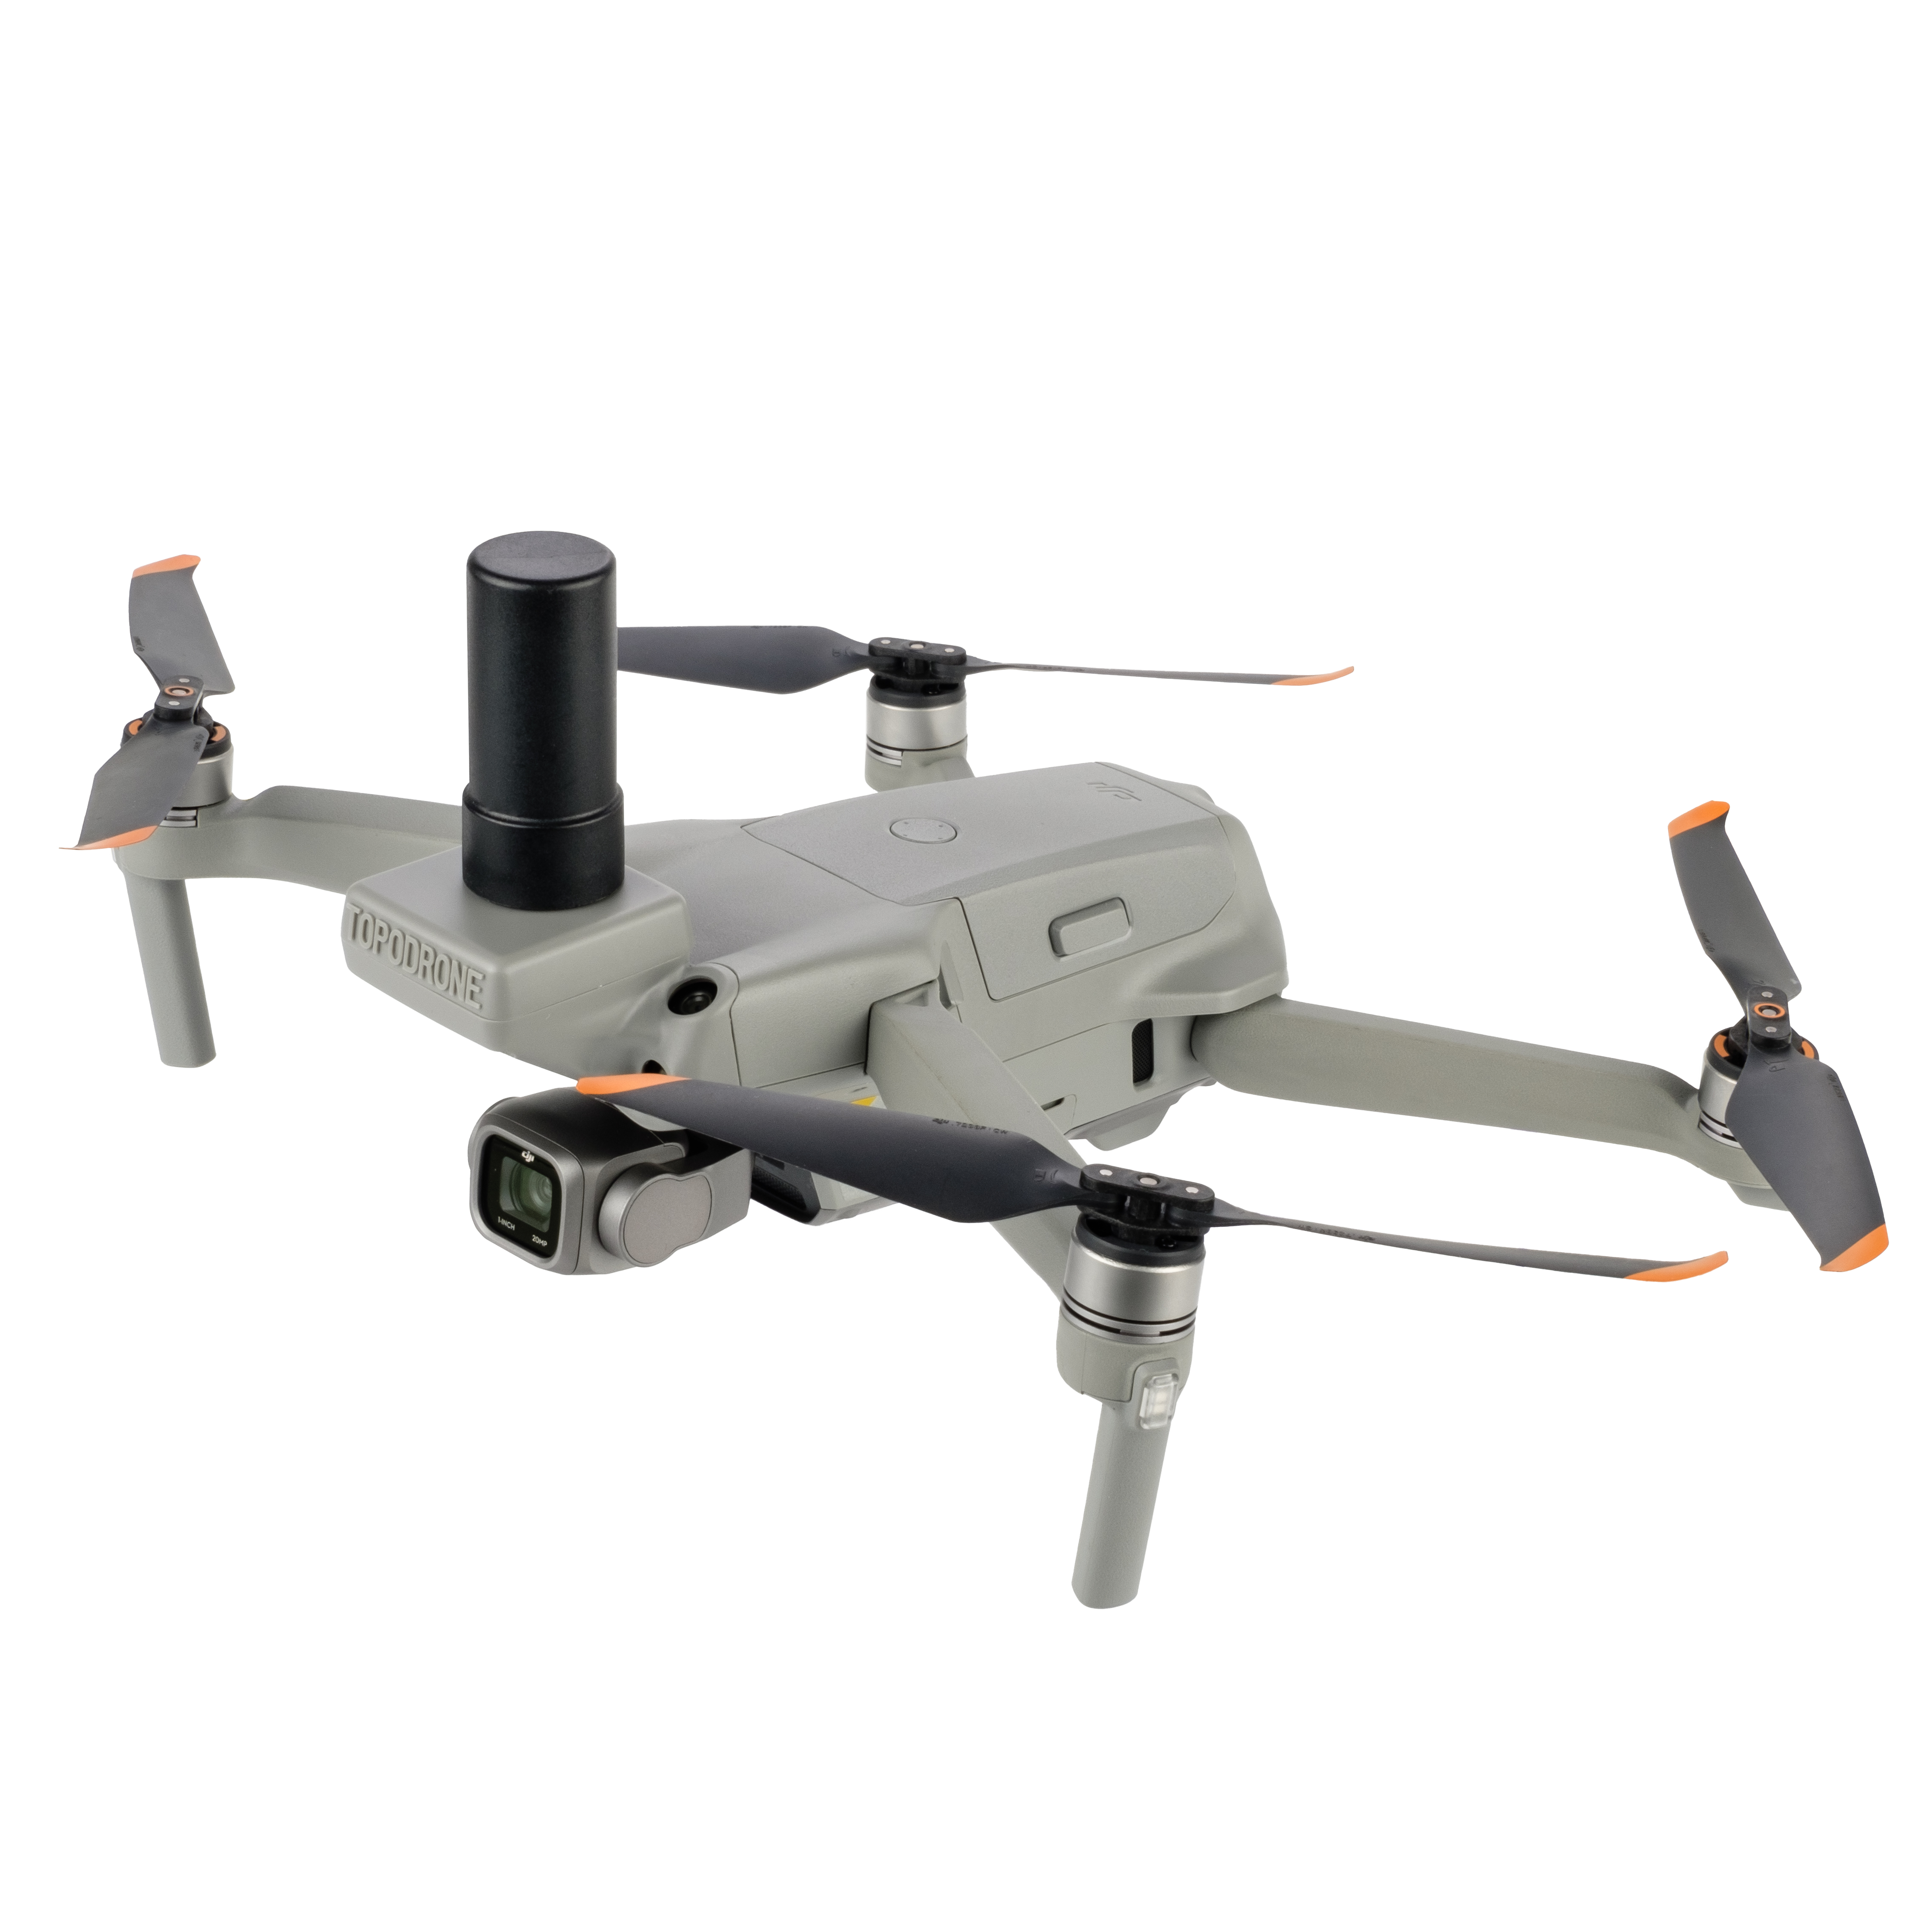 What drone license do I need to fly my DJI Air 2S